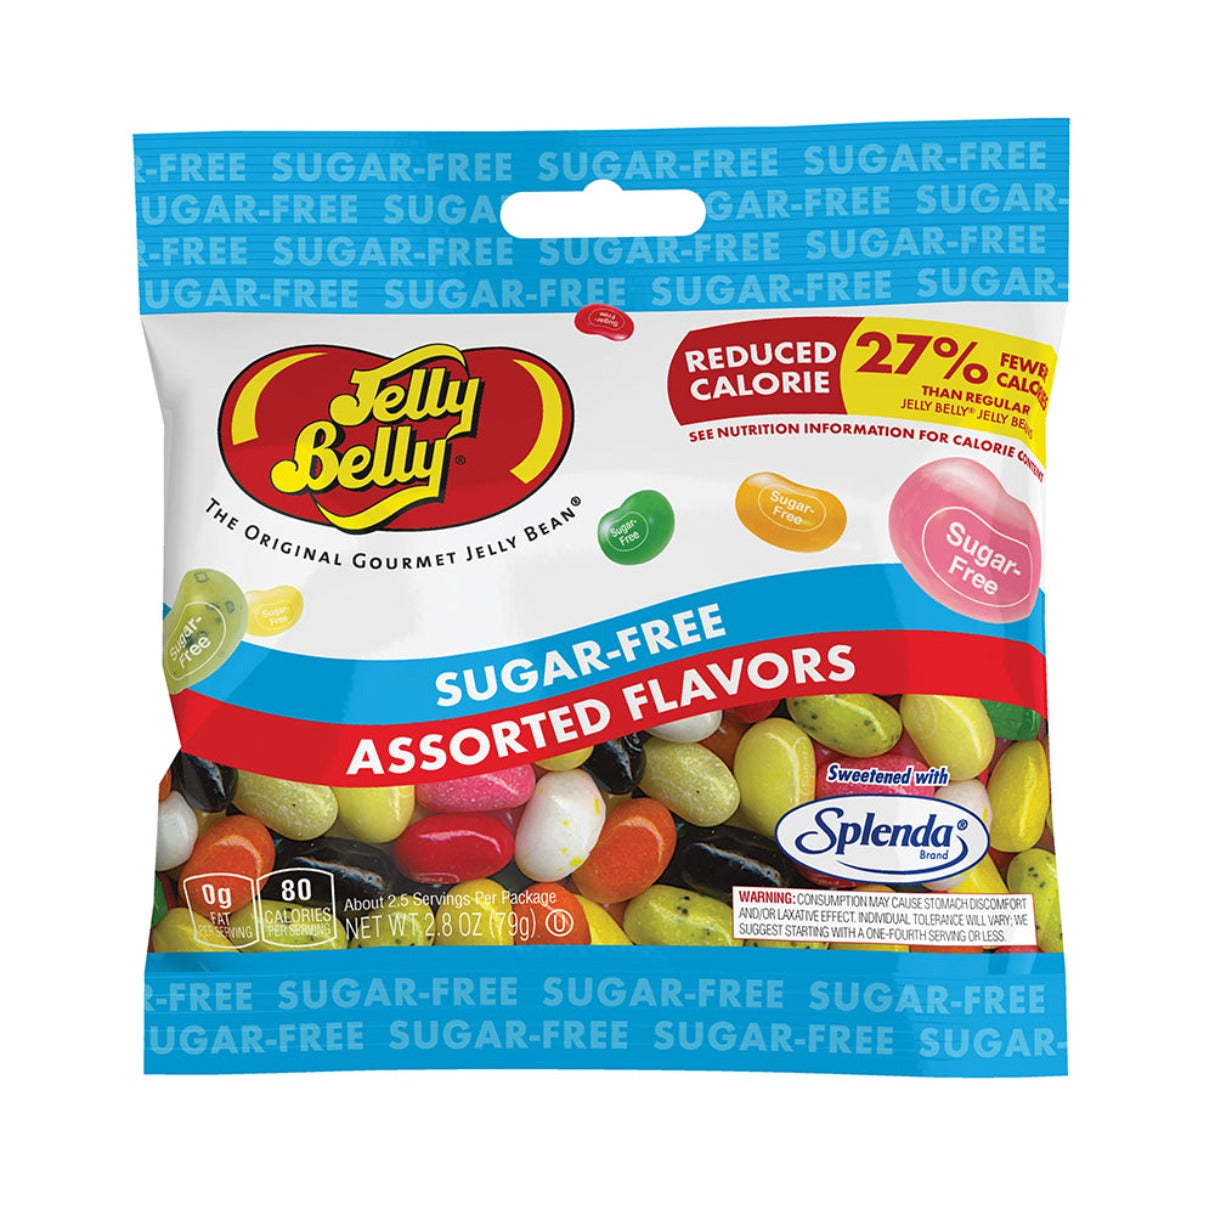 Jelly Belly Sugar Free Jelly Beans Bag 2.8oz - 12ct